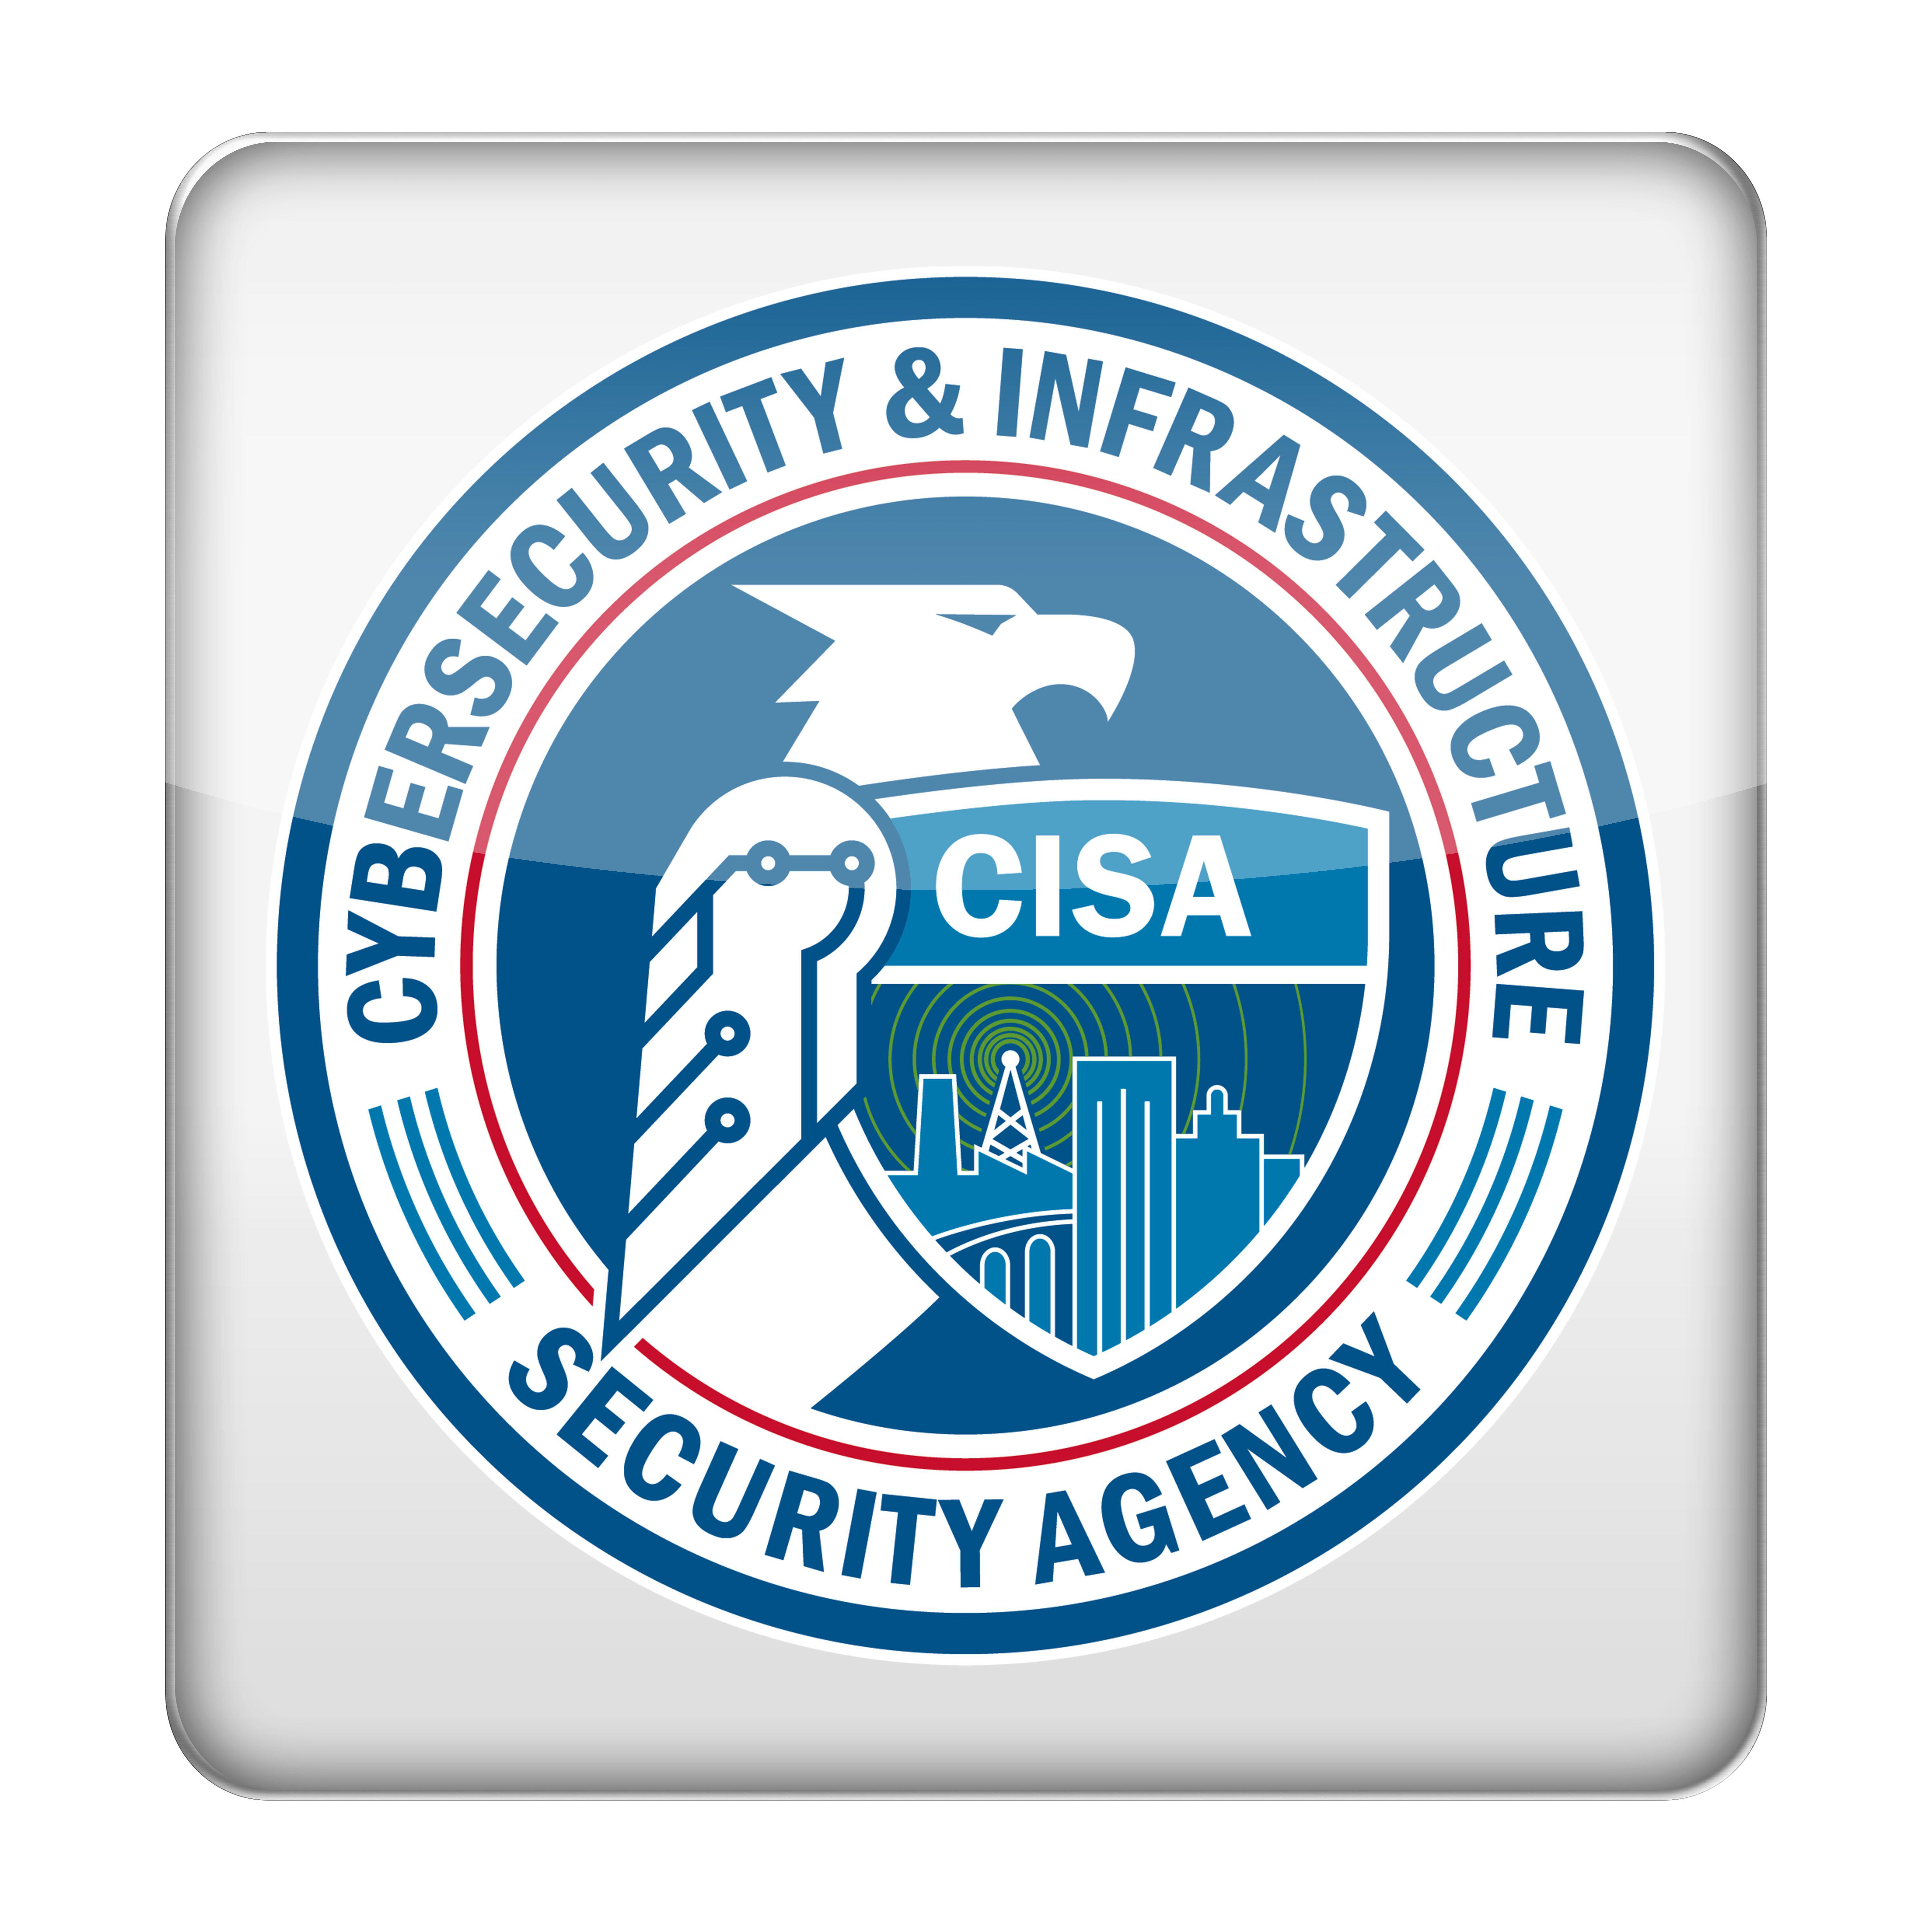 CISA to Open Supply Chain Risk Management Office